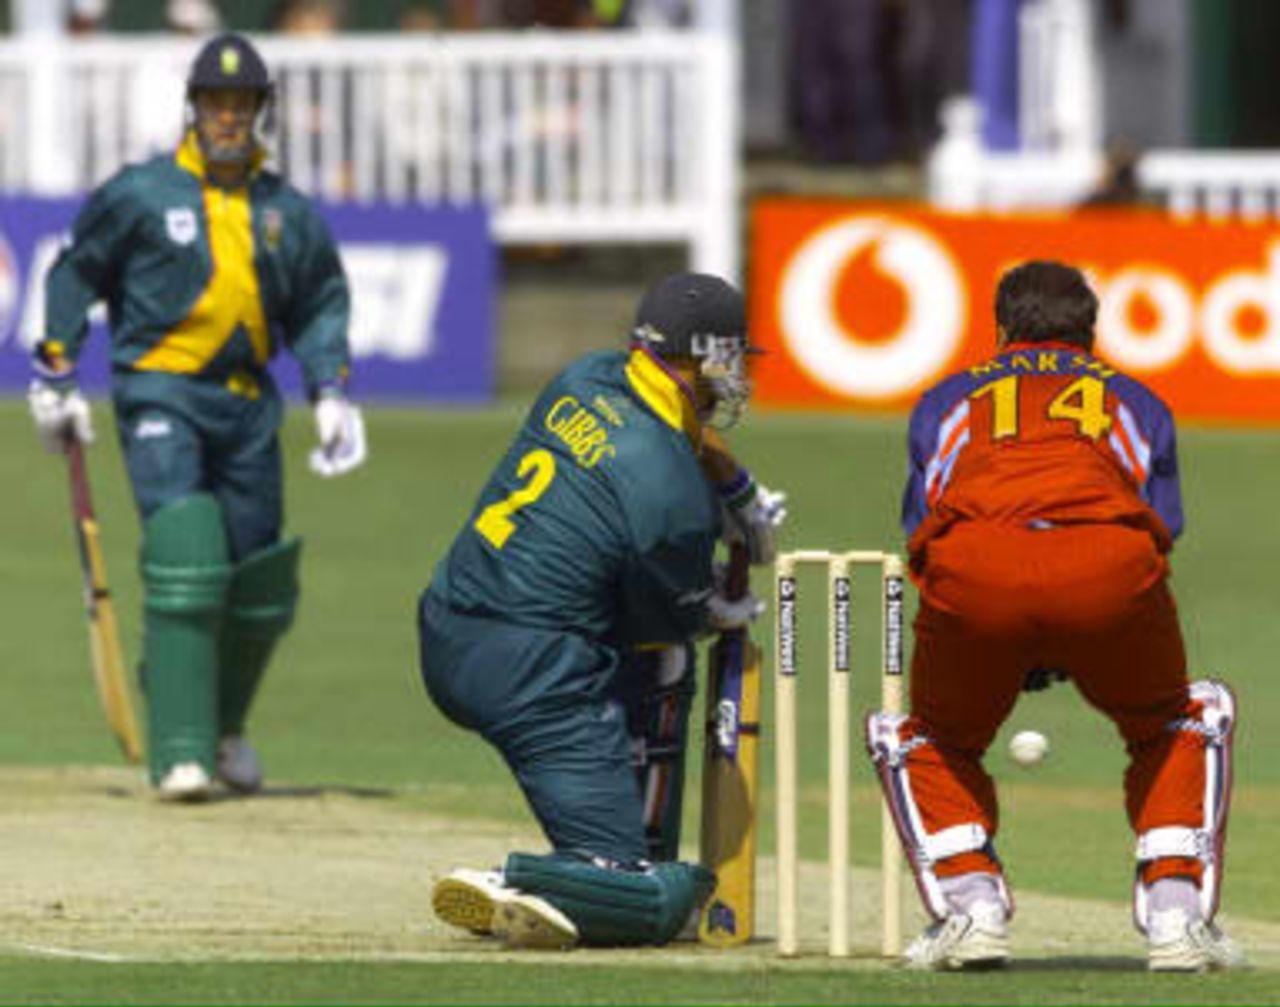 Herschelle Gibbs LBW to Min Patel for 28 runs - World Cup warm up match, South Africa v  Kent at Canterbury 09 May 99.